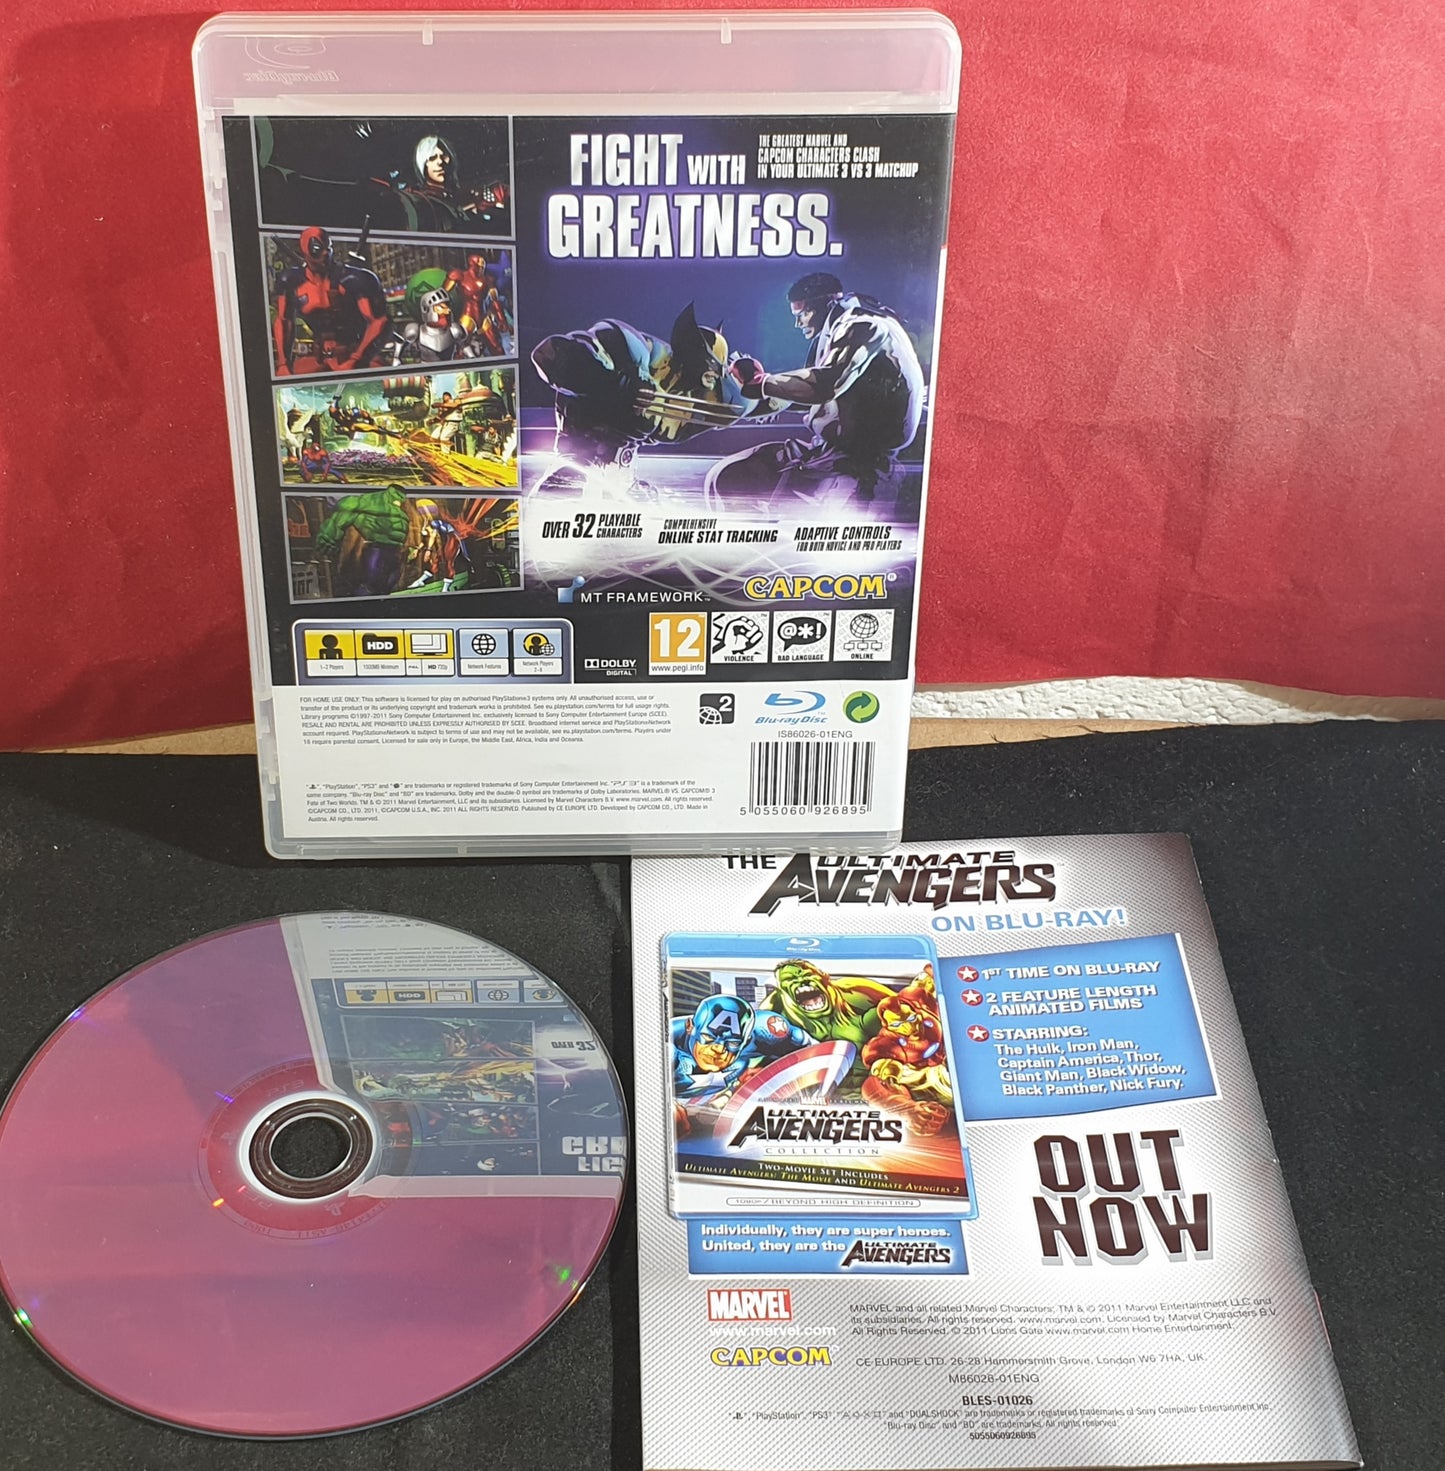 Marvel Vs Capcom 3 Fate of Two Worlds Sony Playstation 3 (PS3) Game